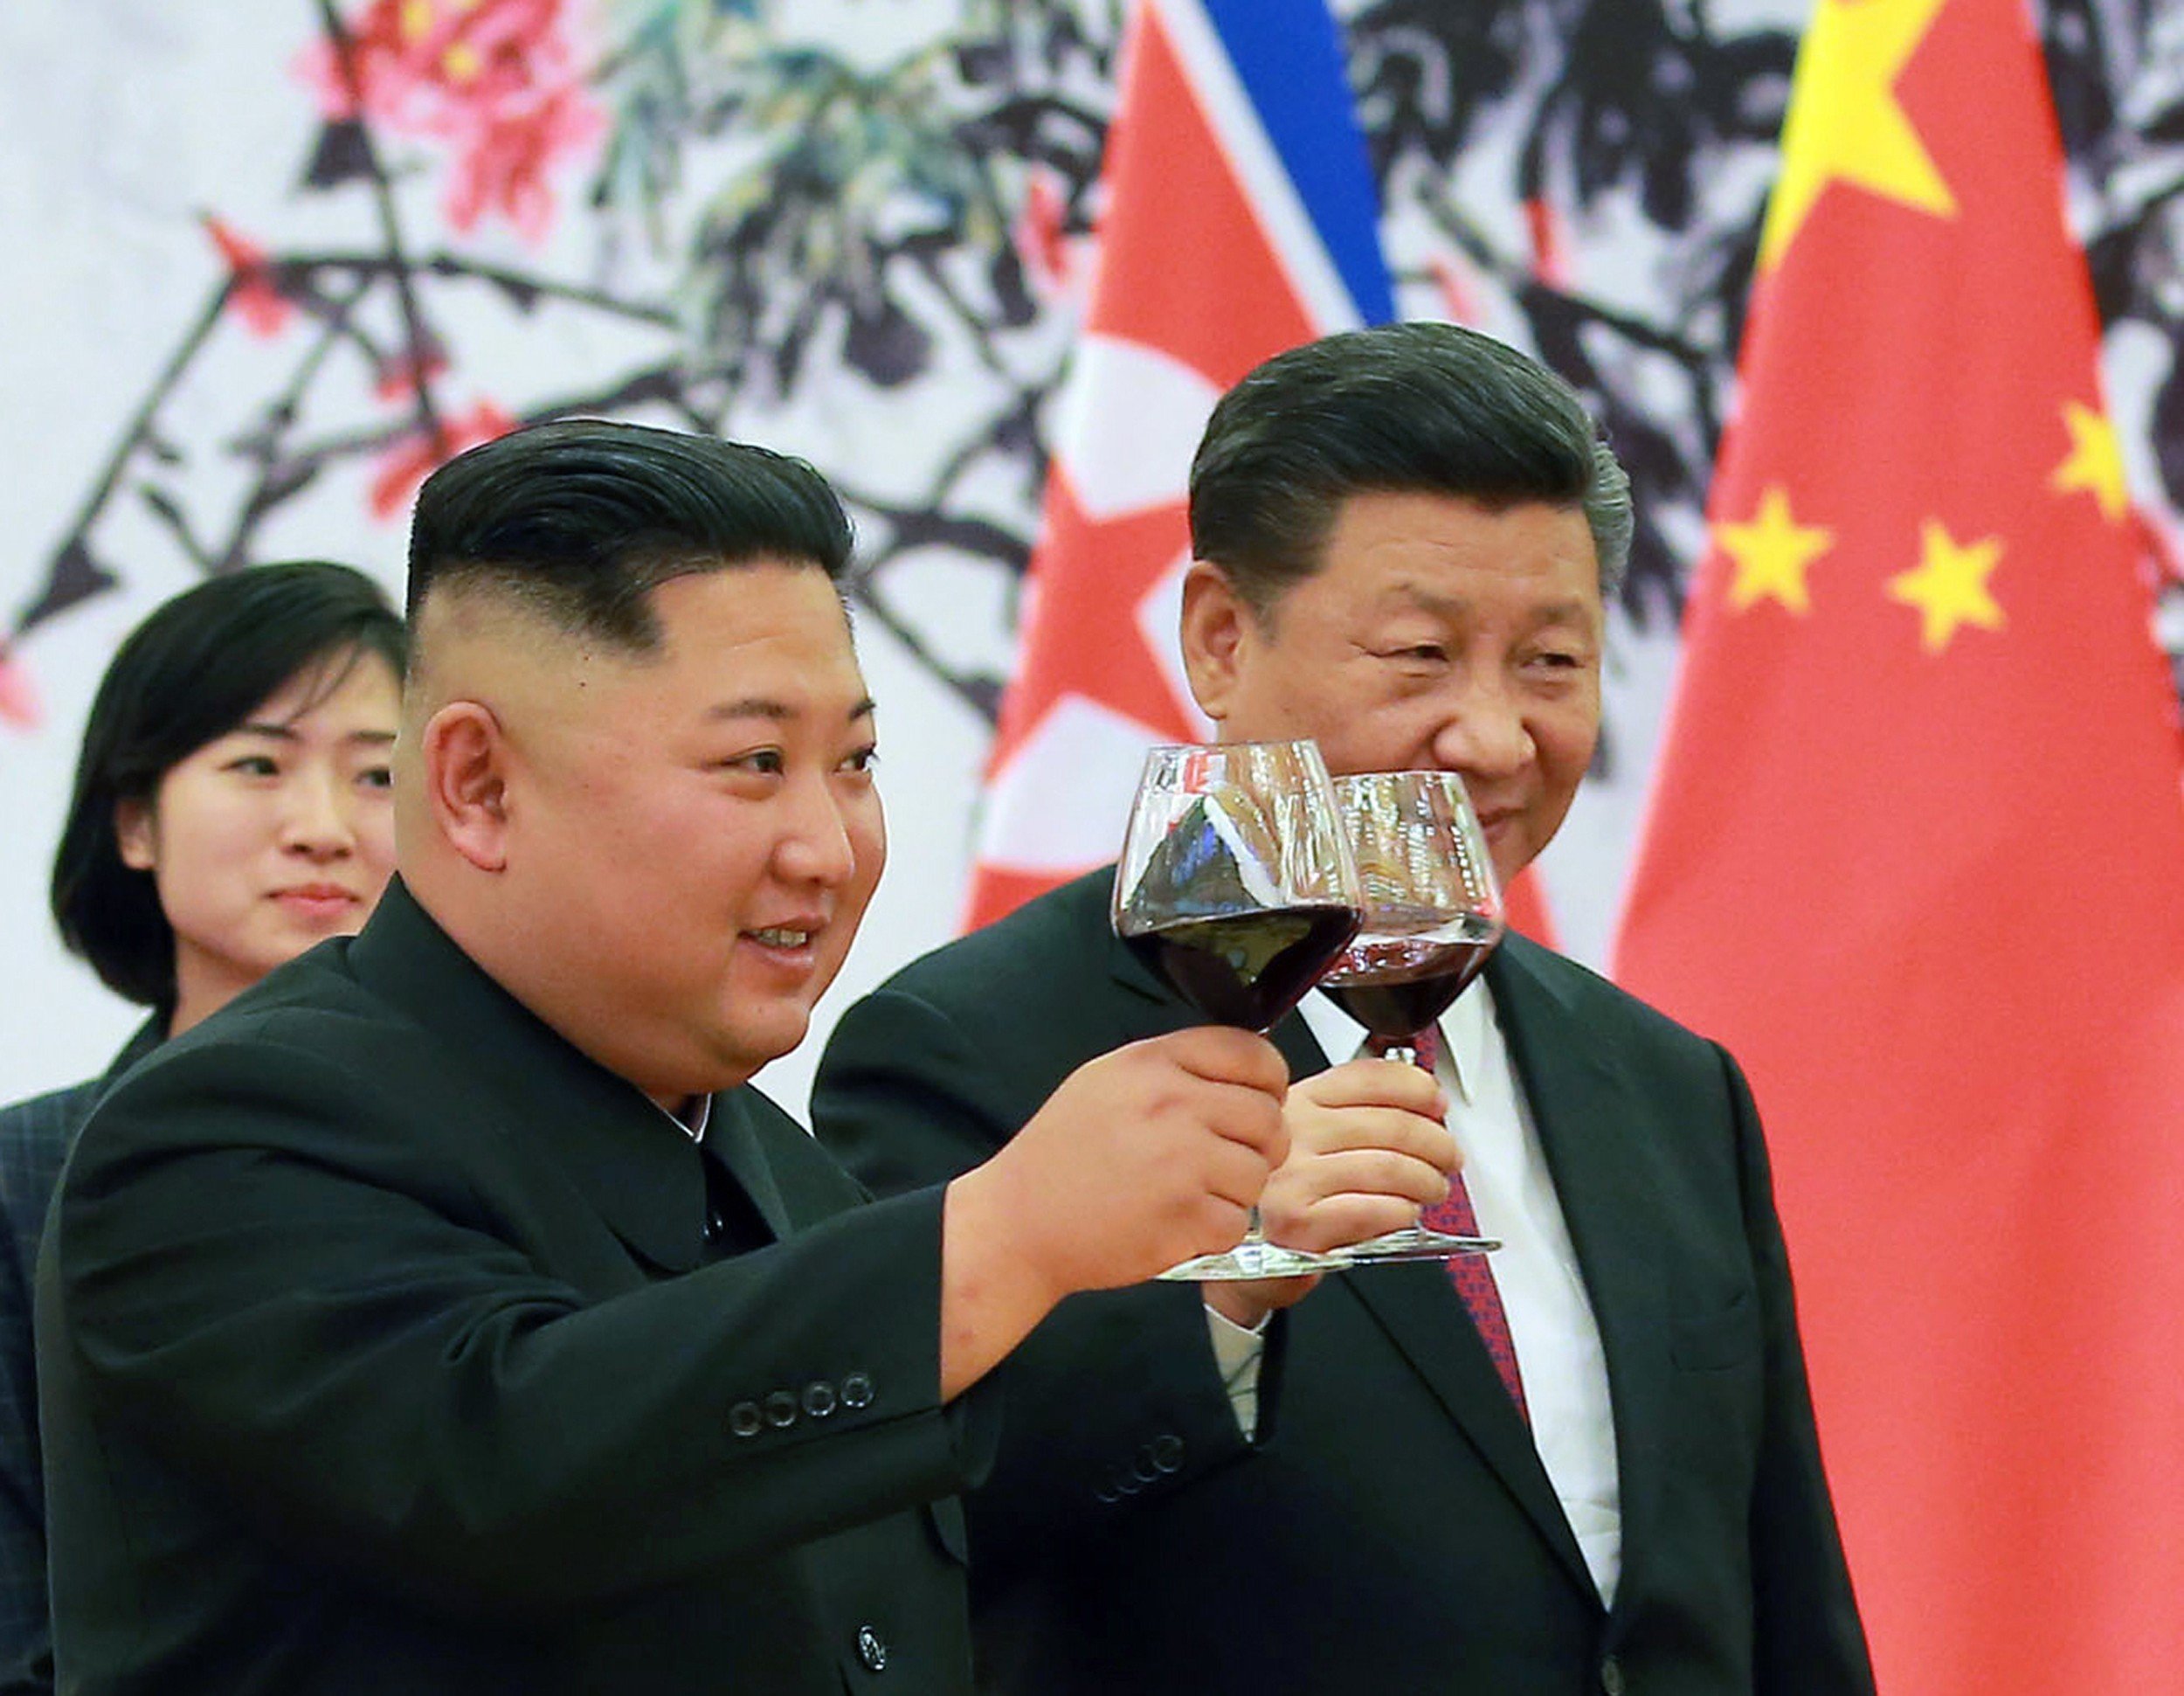 North Korean leader Kim Jong-un raises a glass with Chinese President Xi Jinping in June 2018 in Beijing. Though China has disapproved of North Korea’s nuclear testing, its refusal to consider punitive measures that risk North Korea’s collapse has limited the options available for changing Pyongyang’s behaviour. Photo: AP